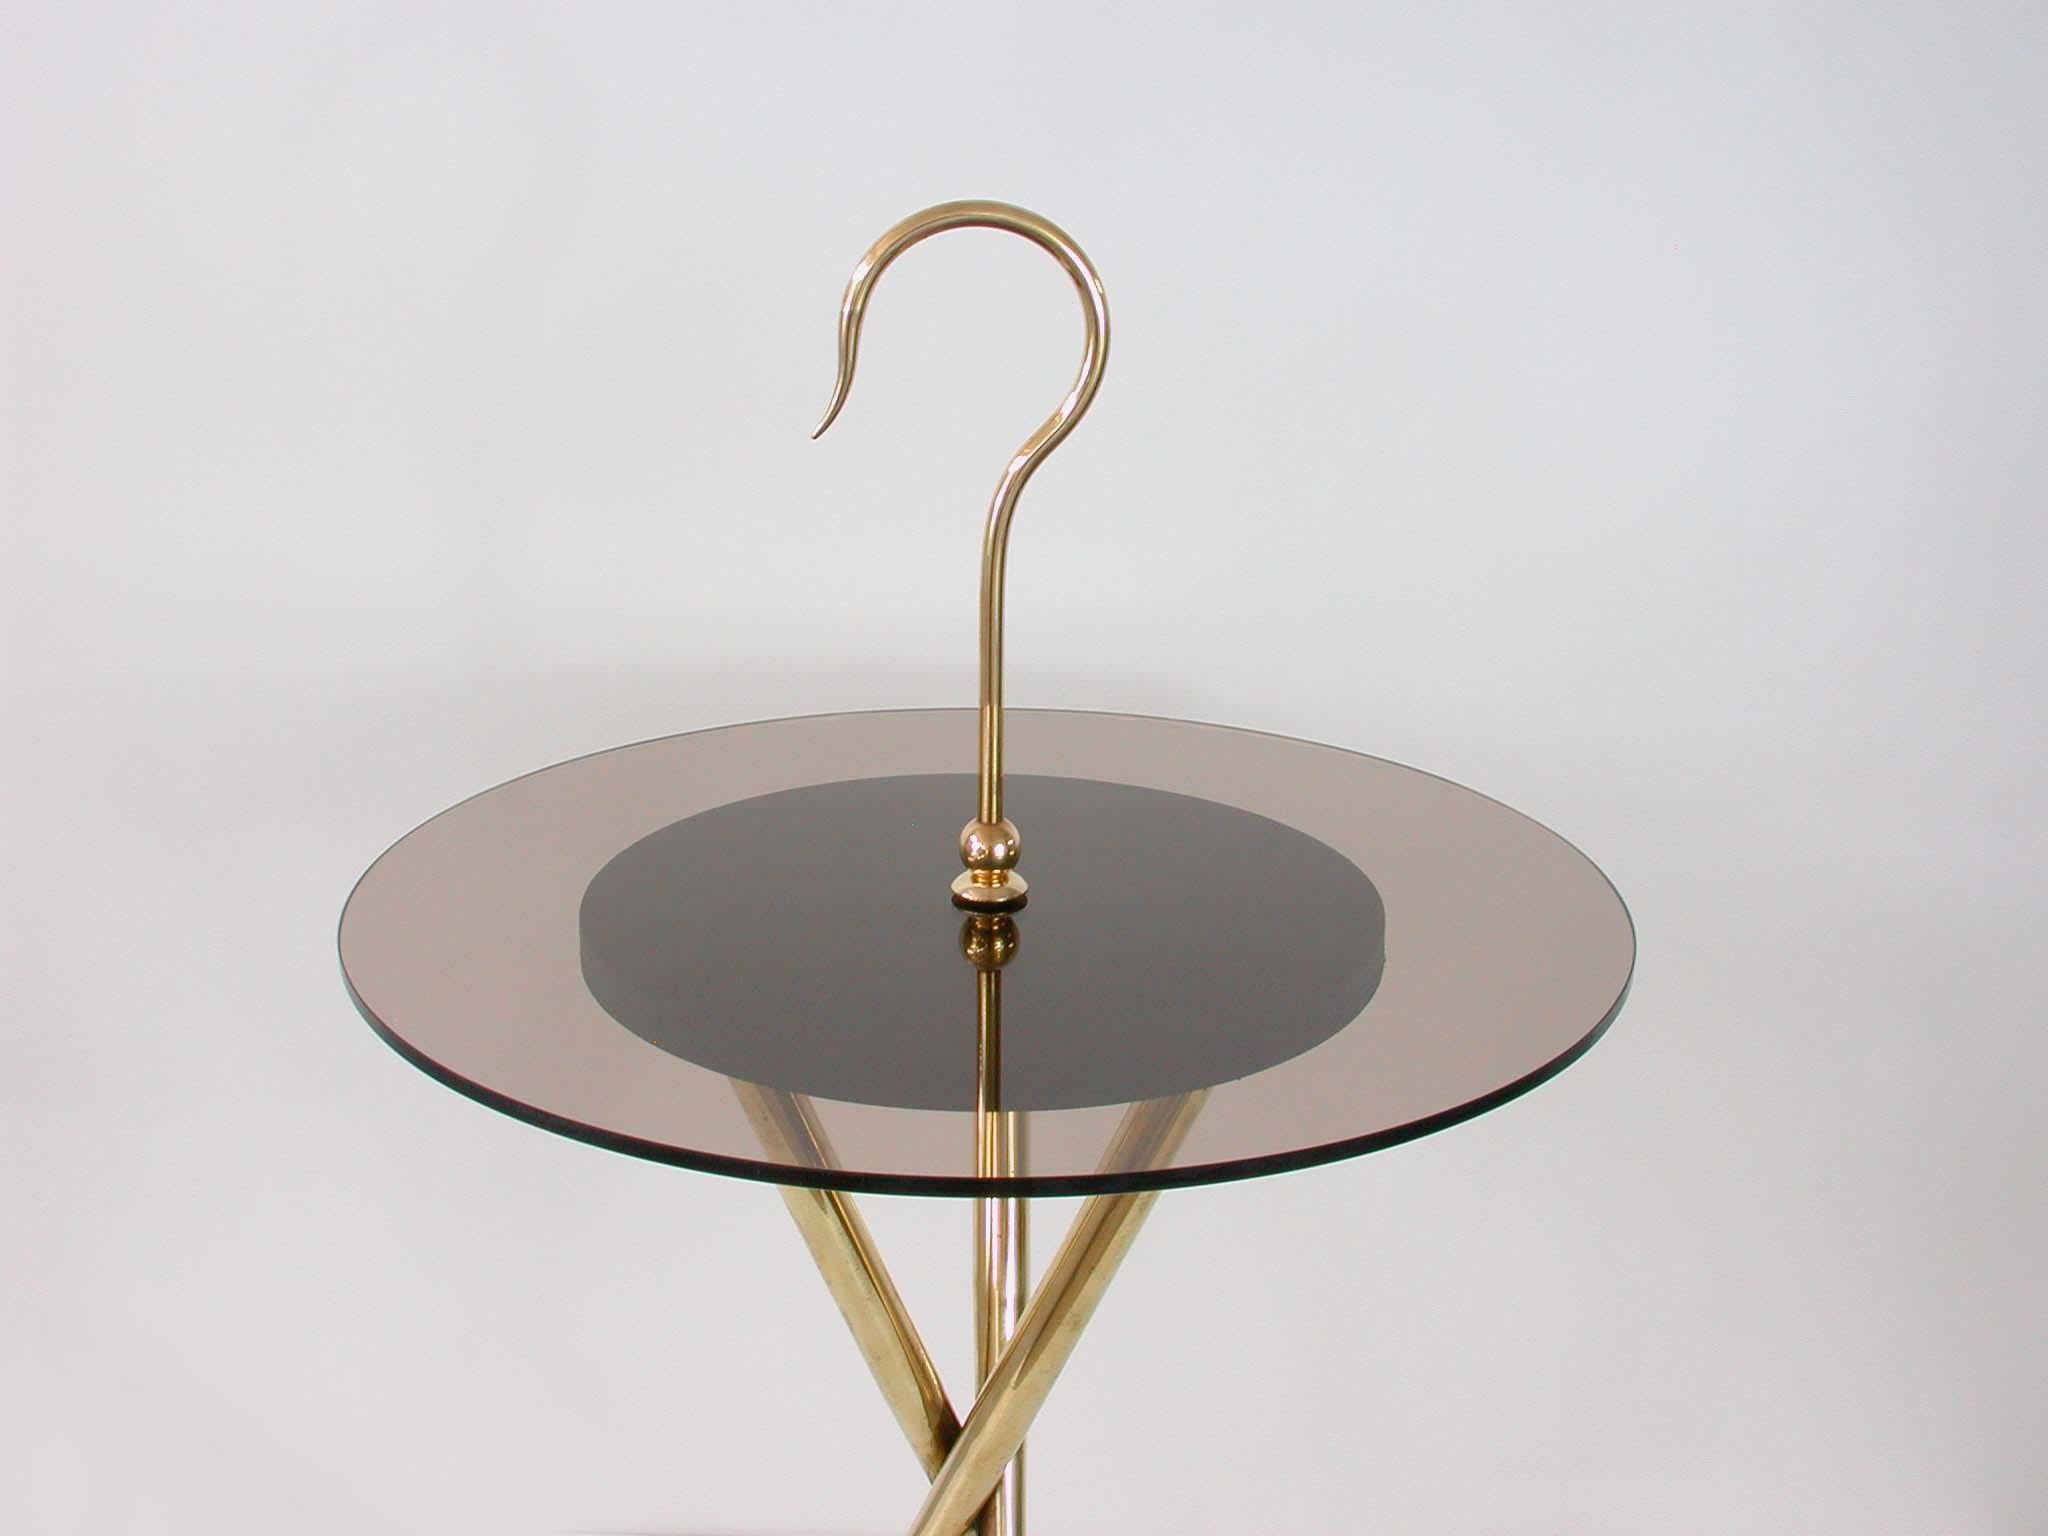 Italian Midcentury Brass and Tinted Glass Occasional Table, 1950s For Sale 7